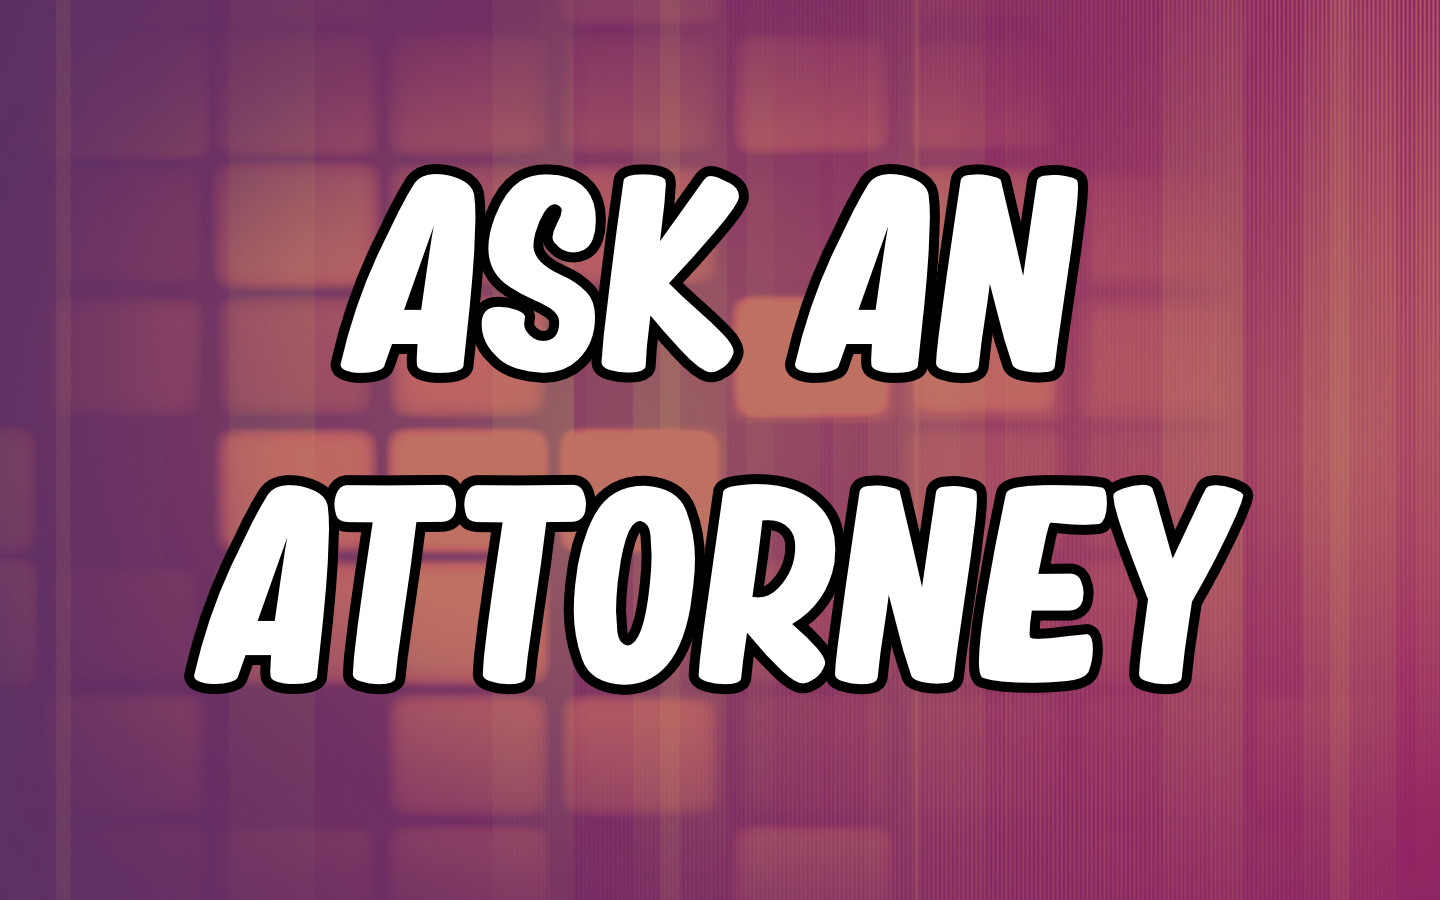 Ask an attorney